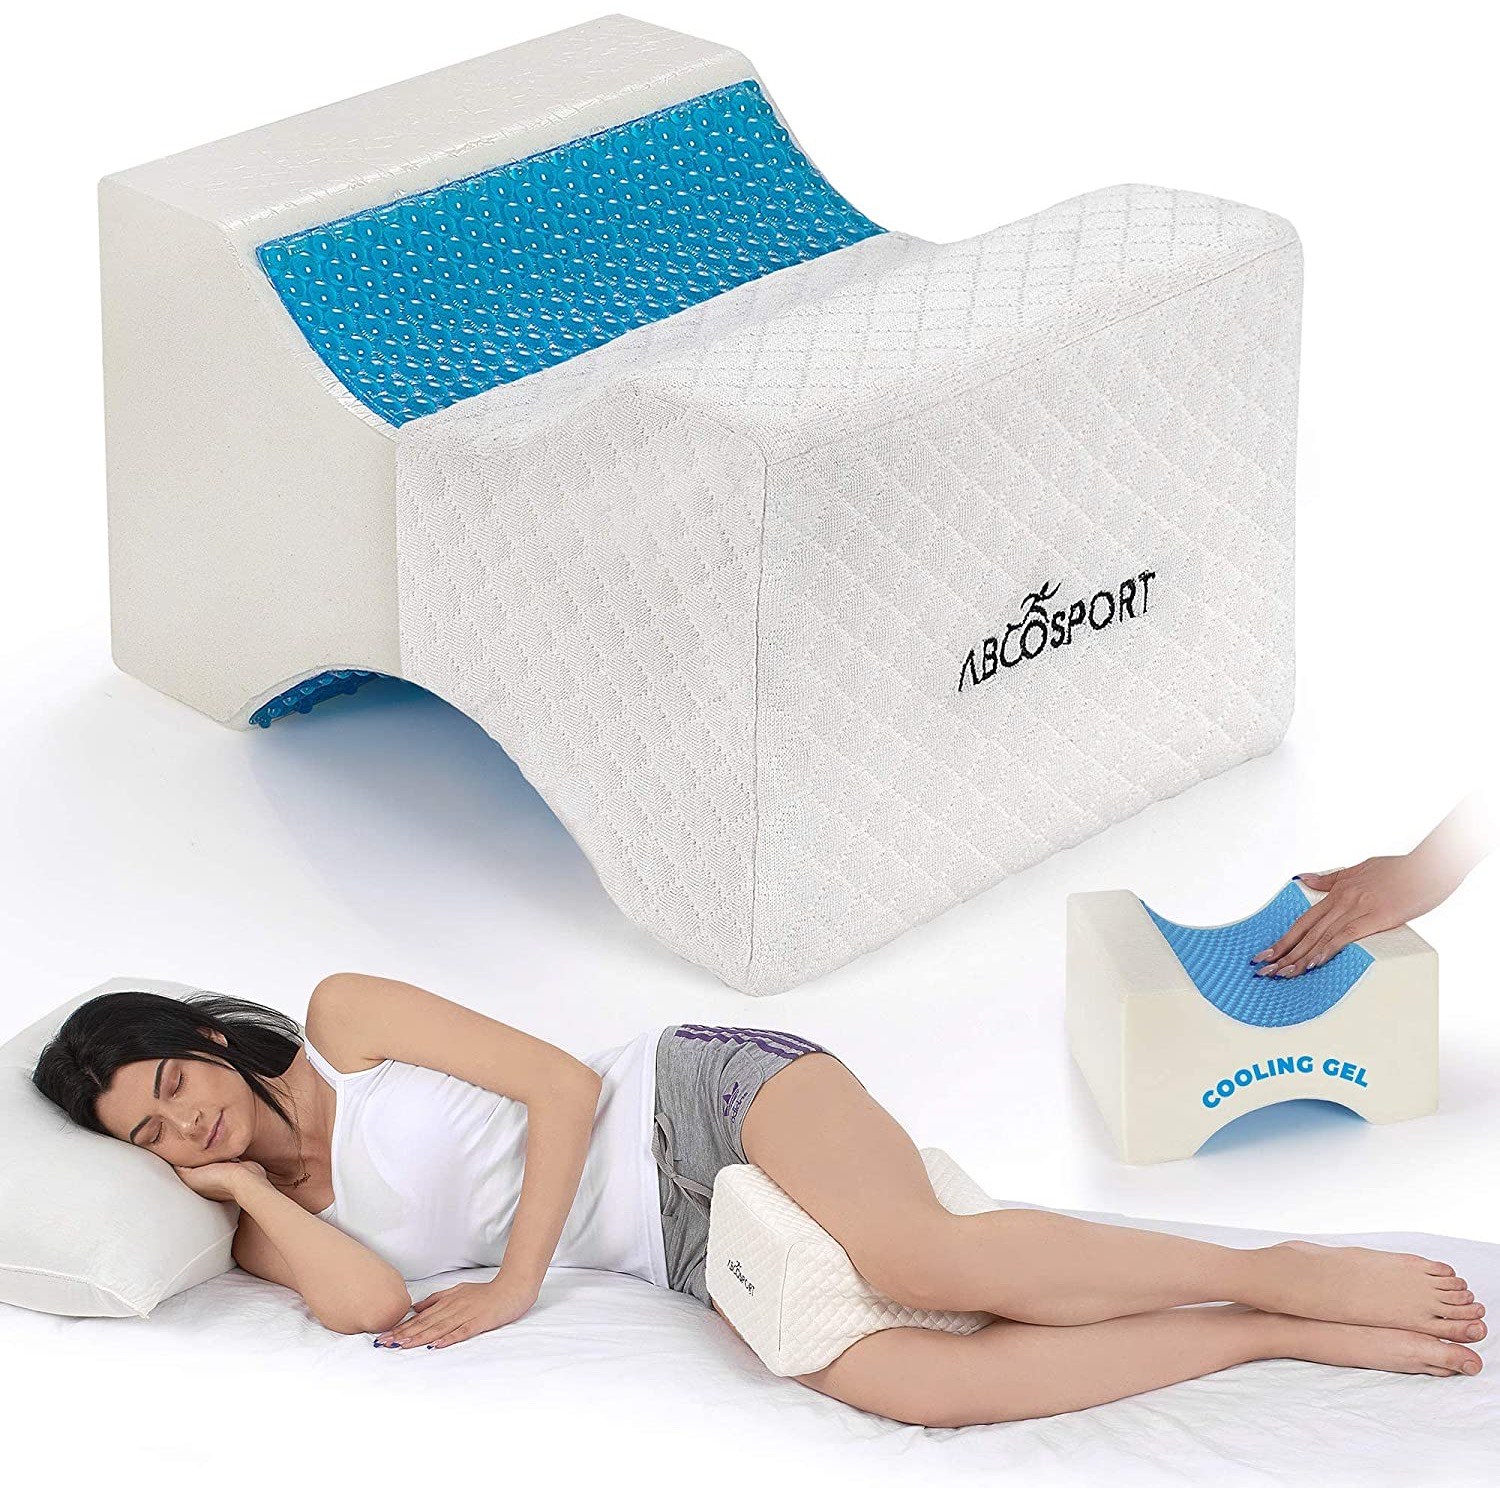 How to choose the best orthopedic knee pillow